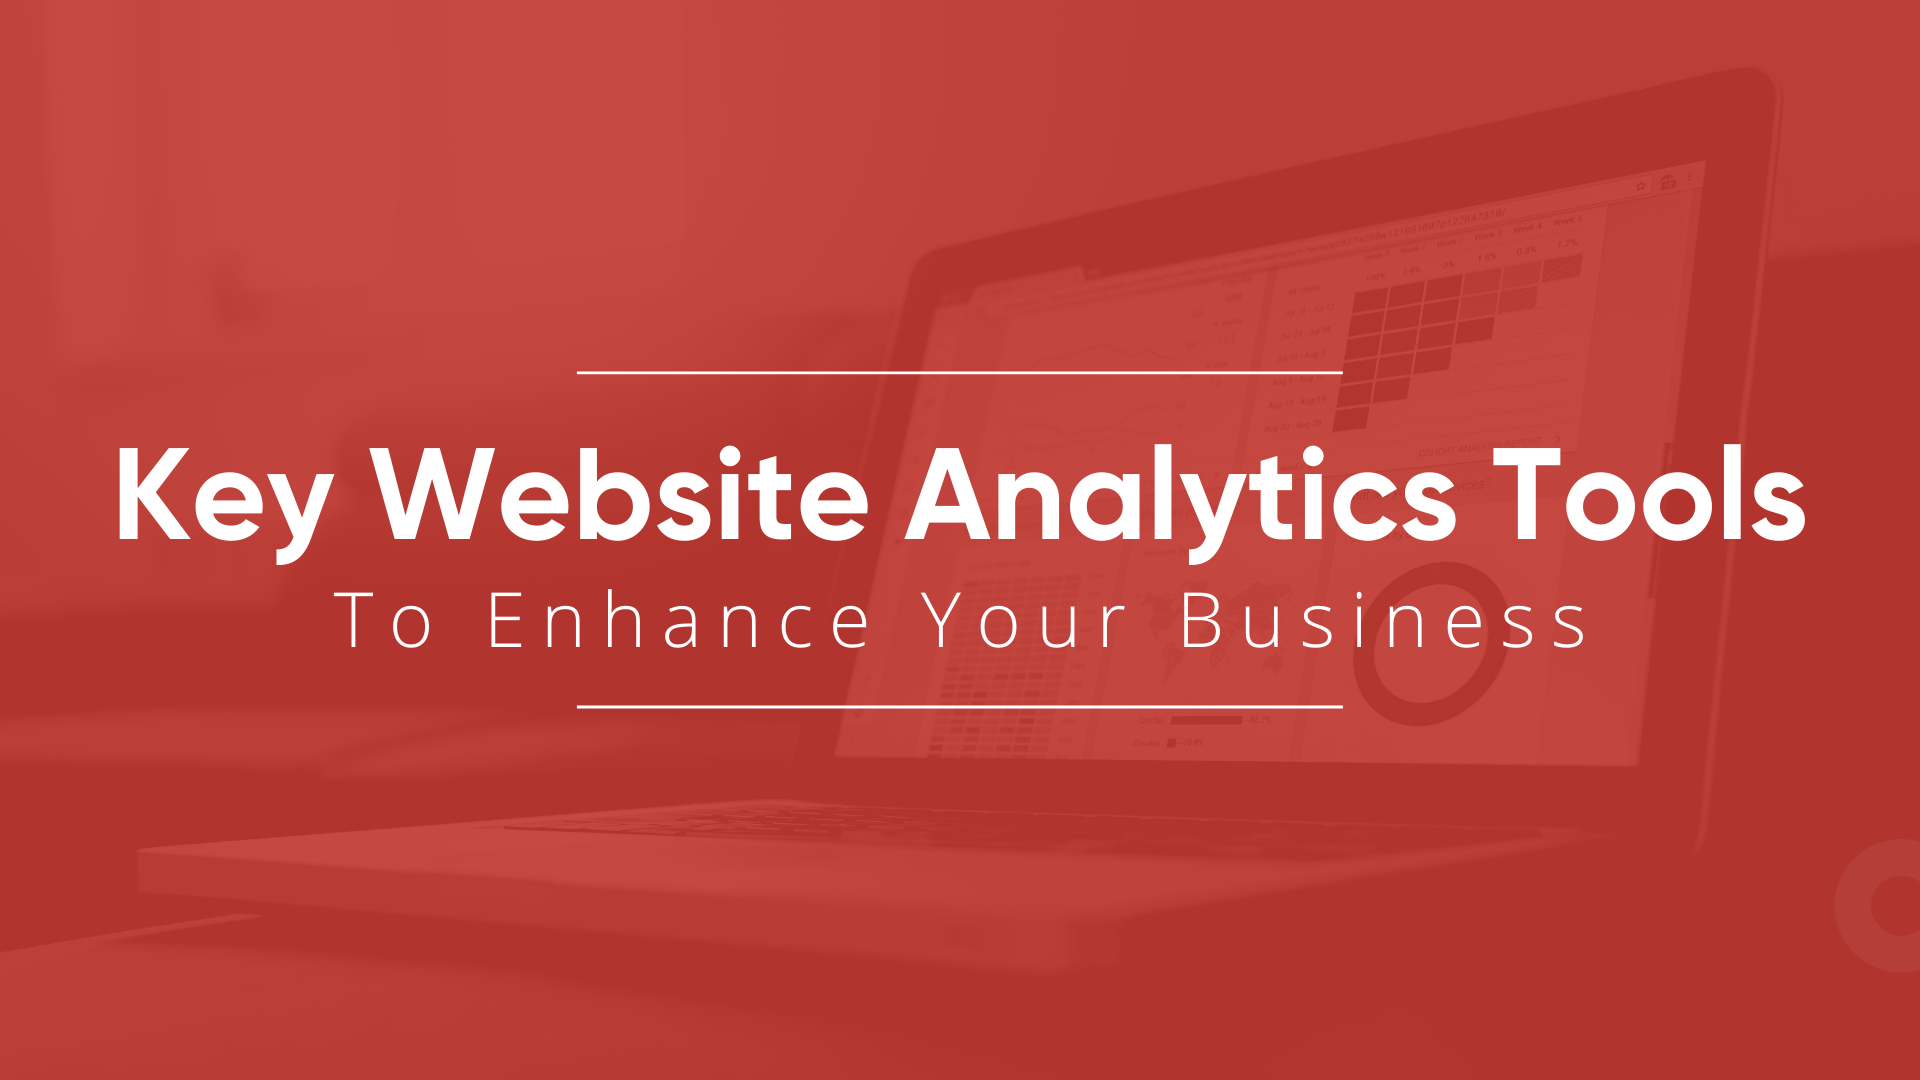 website analytics, key website analytics, analytics how to, website traffic, website audience, business analytics, small business website tips, website tips, analytics tips